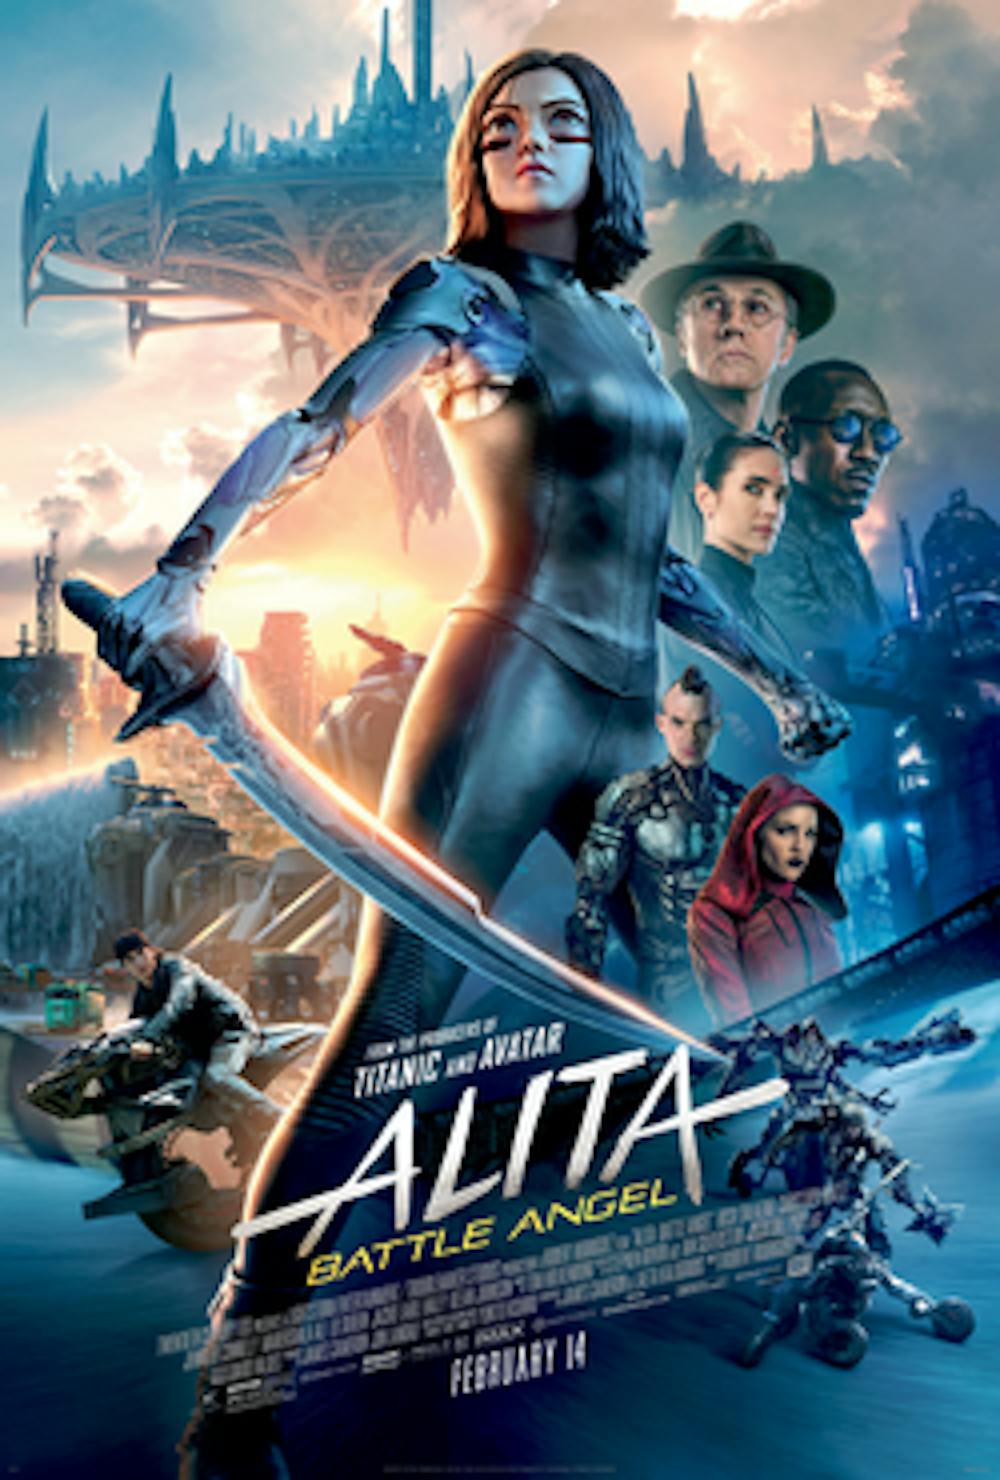 <p>As an action film, “Alita: Battle Angel” is visually stimulating and functional enough to kill two hours for any person looking for something generic and unchallenging.</p>